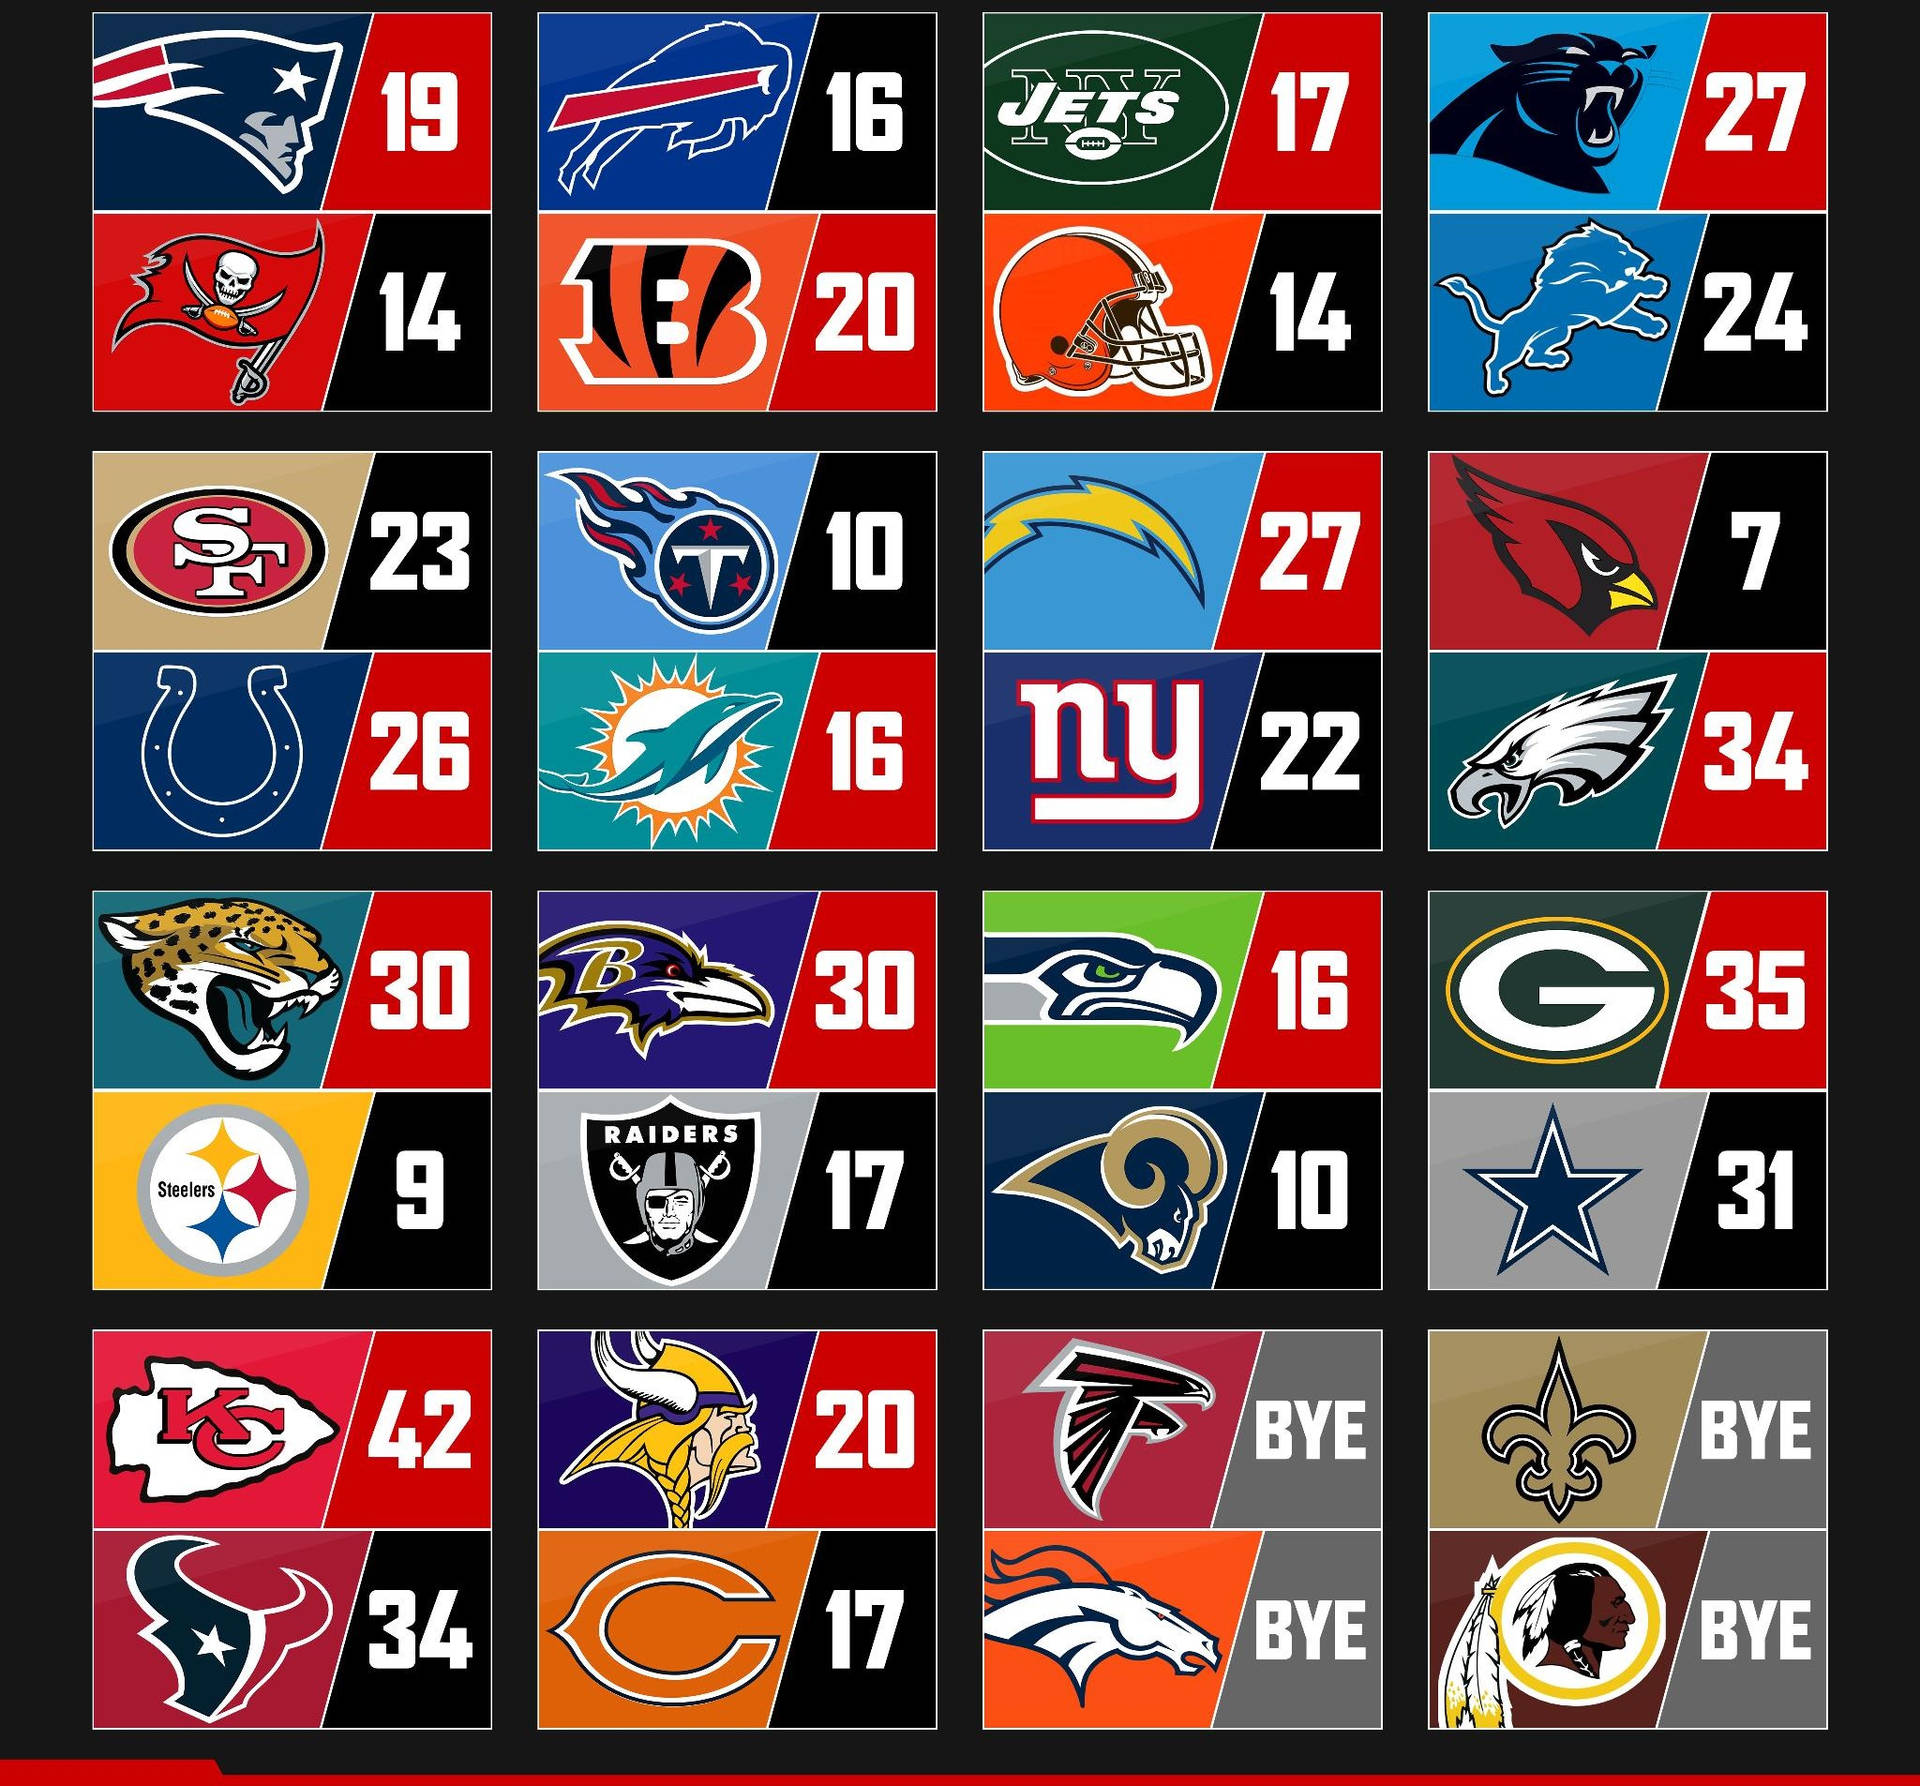 Download Nfl Scores With Football Team Logos Wallpaper